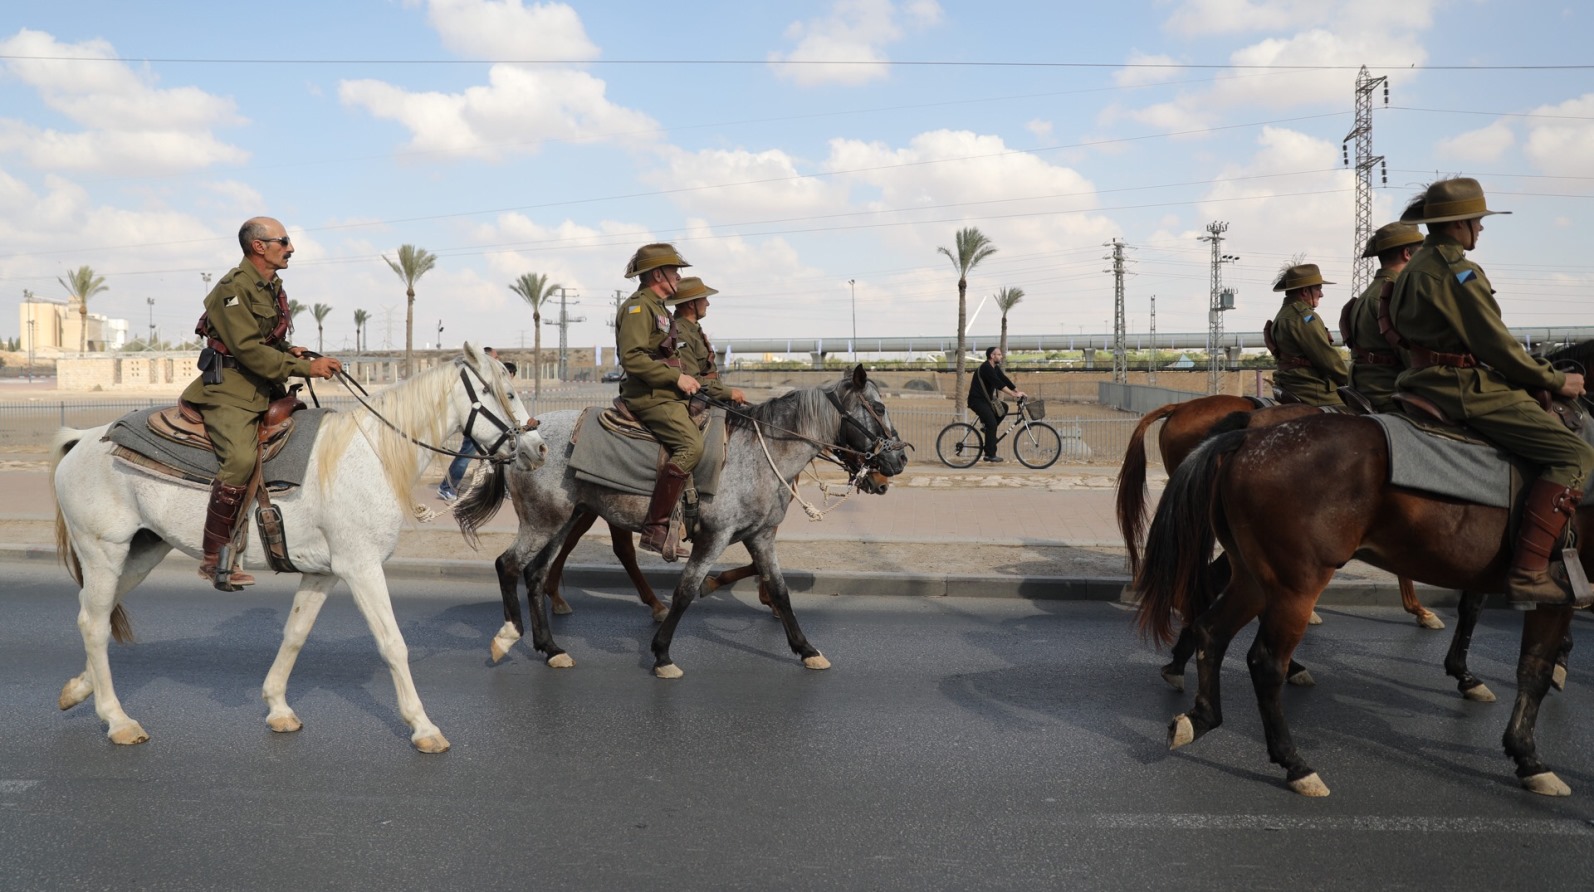 Riders from Australia and New Zealand on the ANZAC Trail in Beersheva on Oct. 31, 2017, commemorating the route ANZAC soldiers took when they liberated the city in World War I. Photo by Hadas Parush/FLASH90